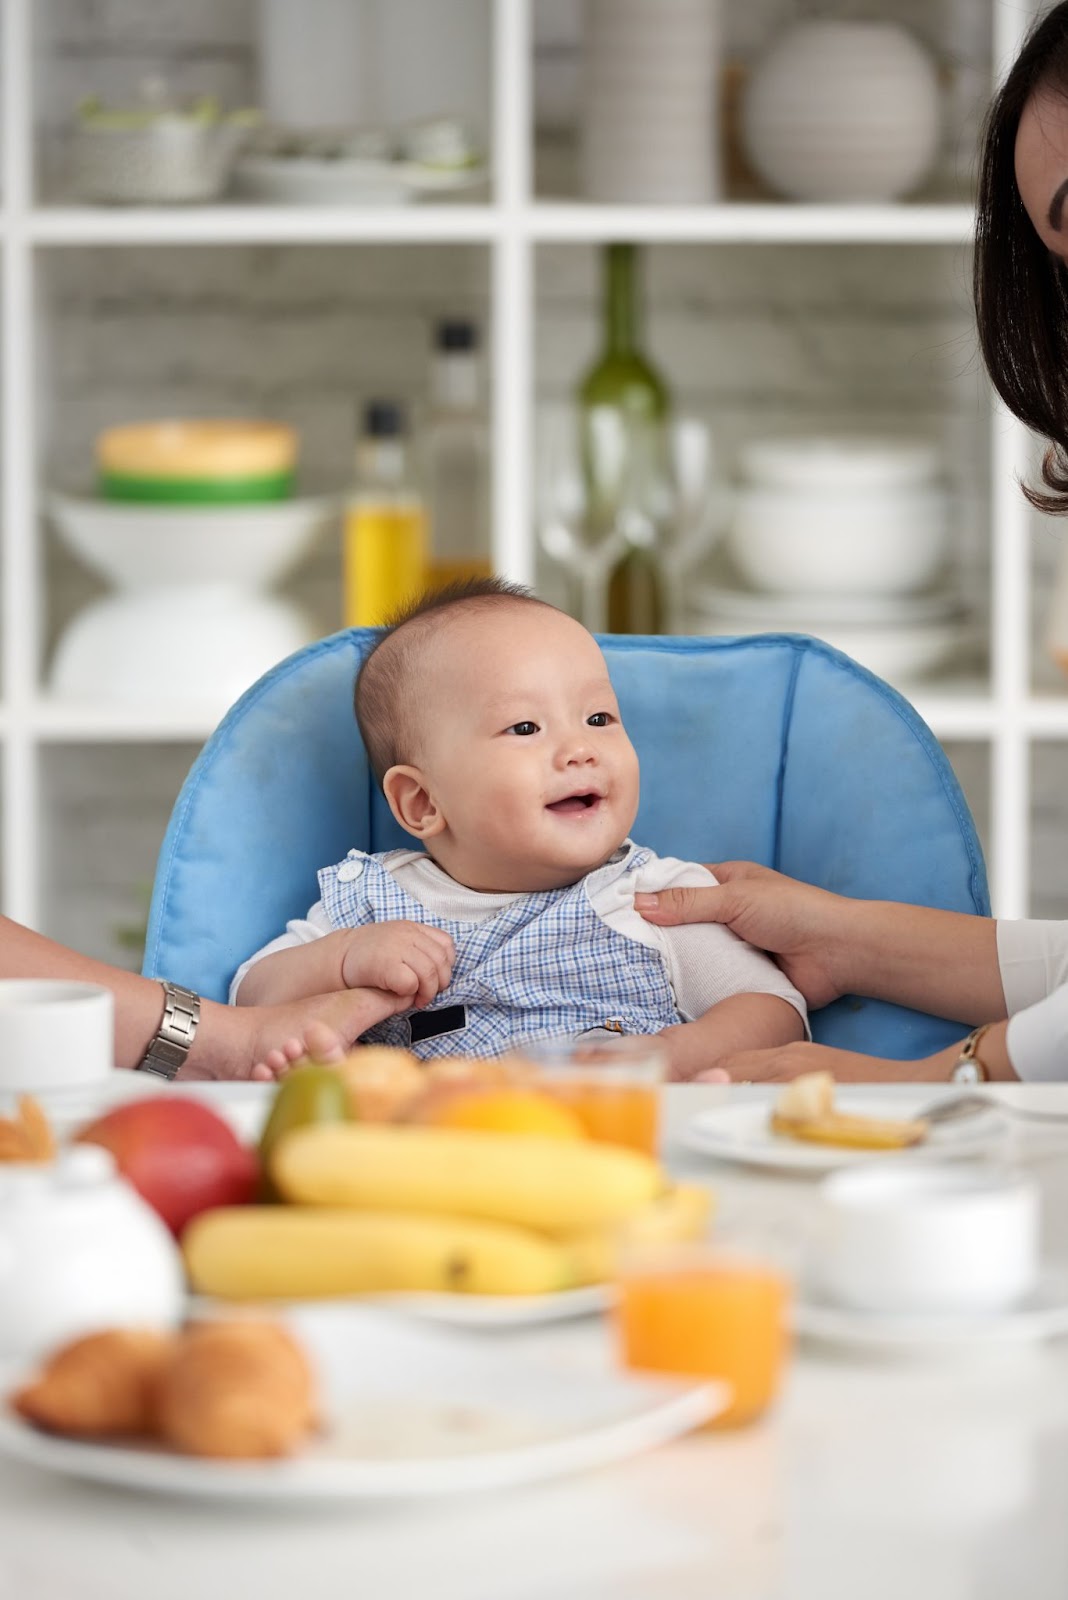 Babies Need a Burp - Why Do You Burp A Baby - Baby Journey 